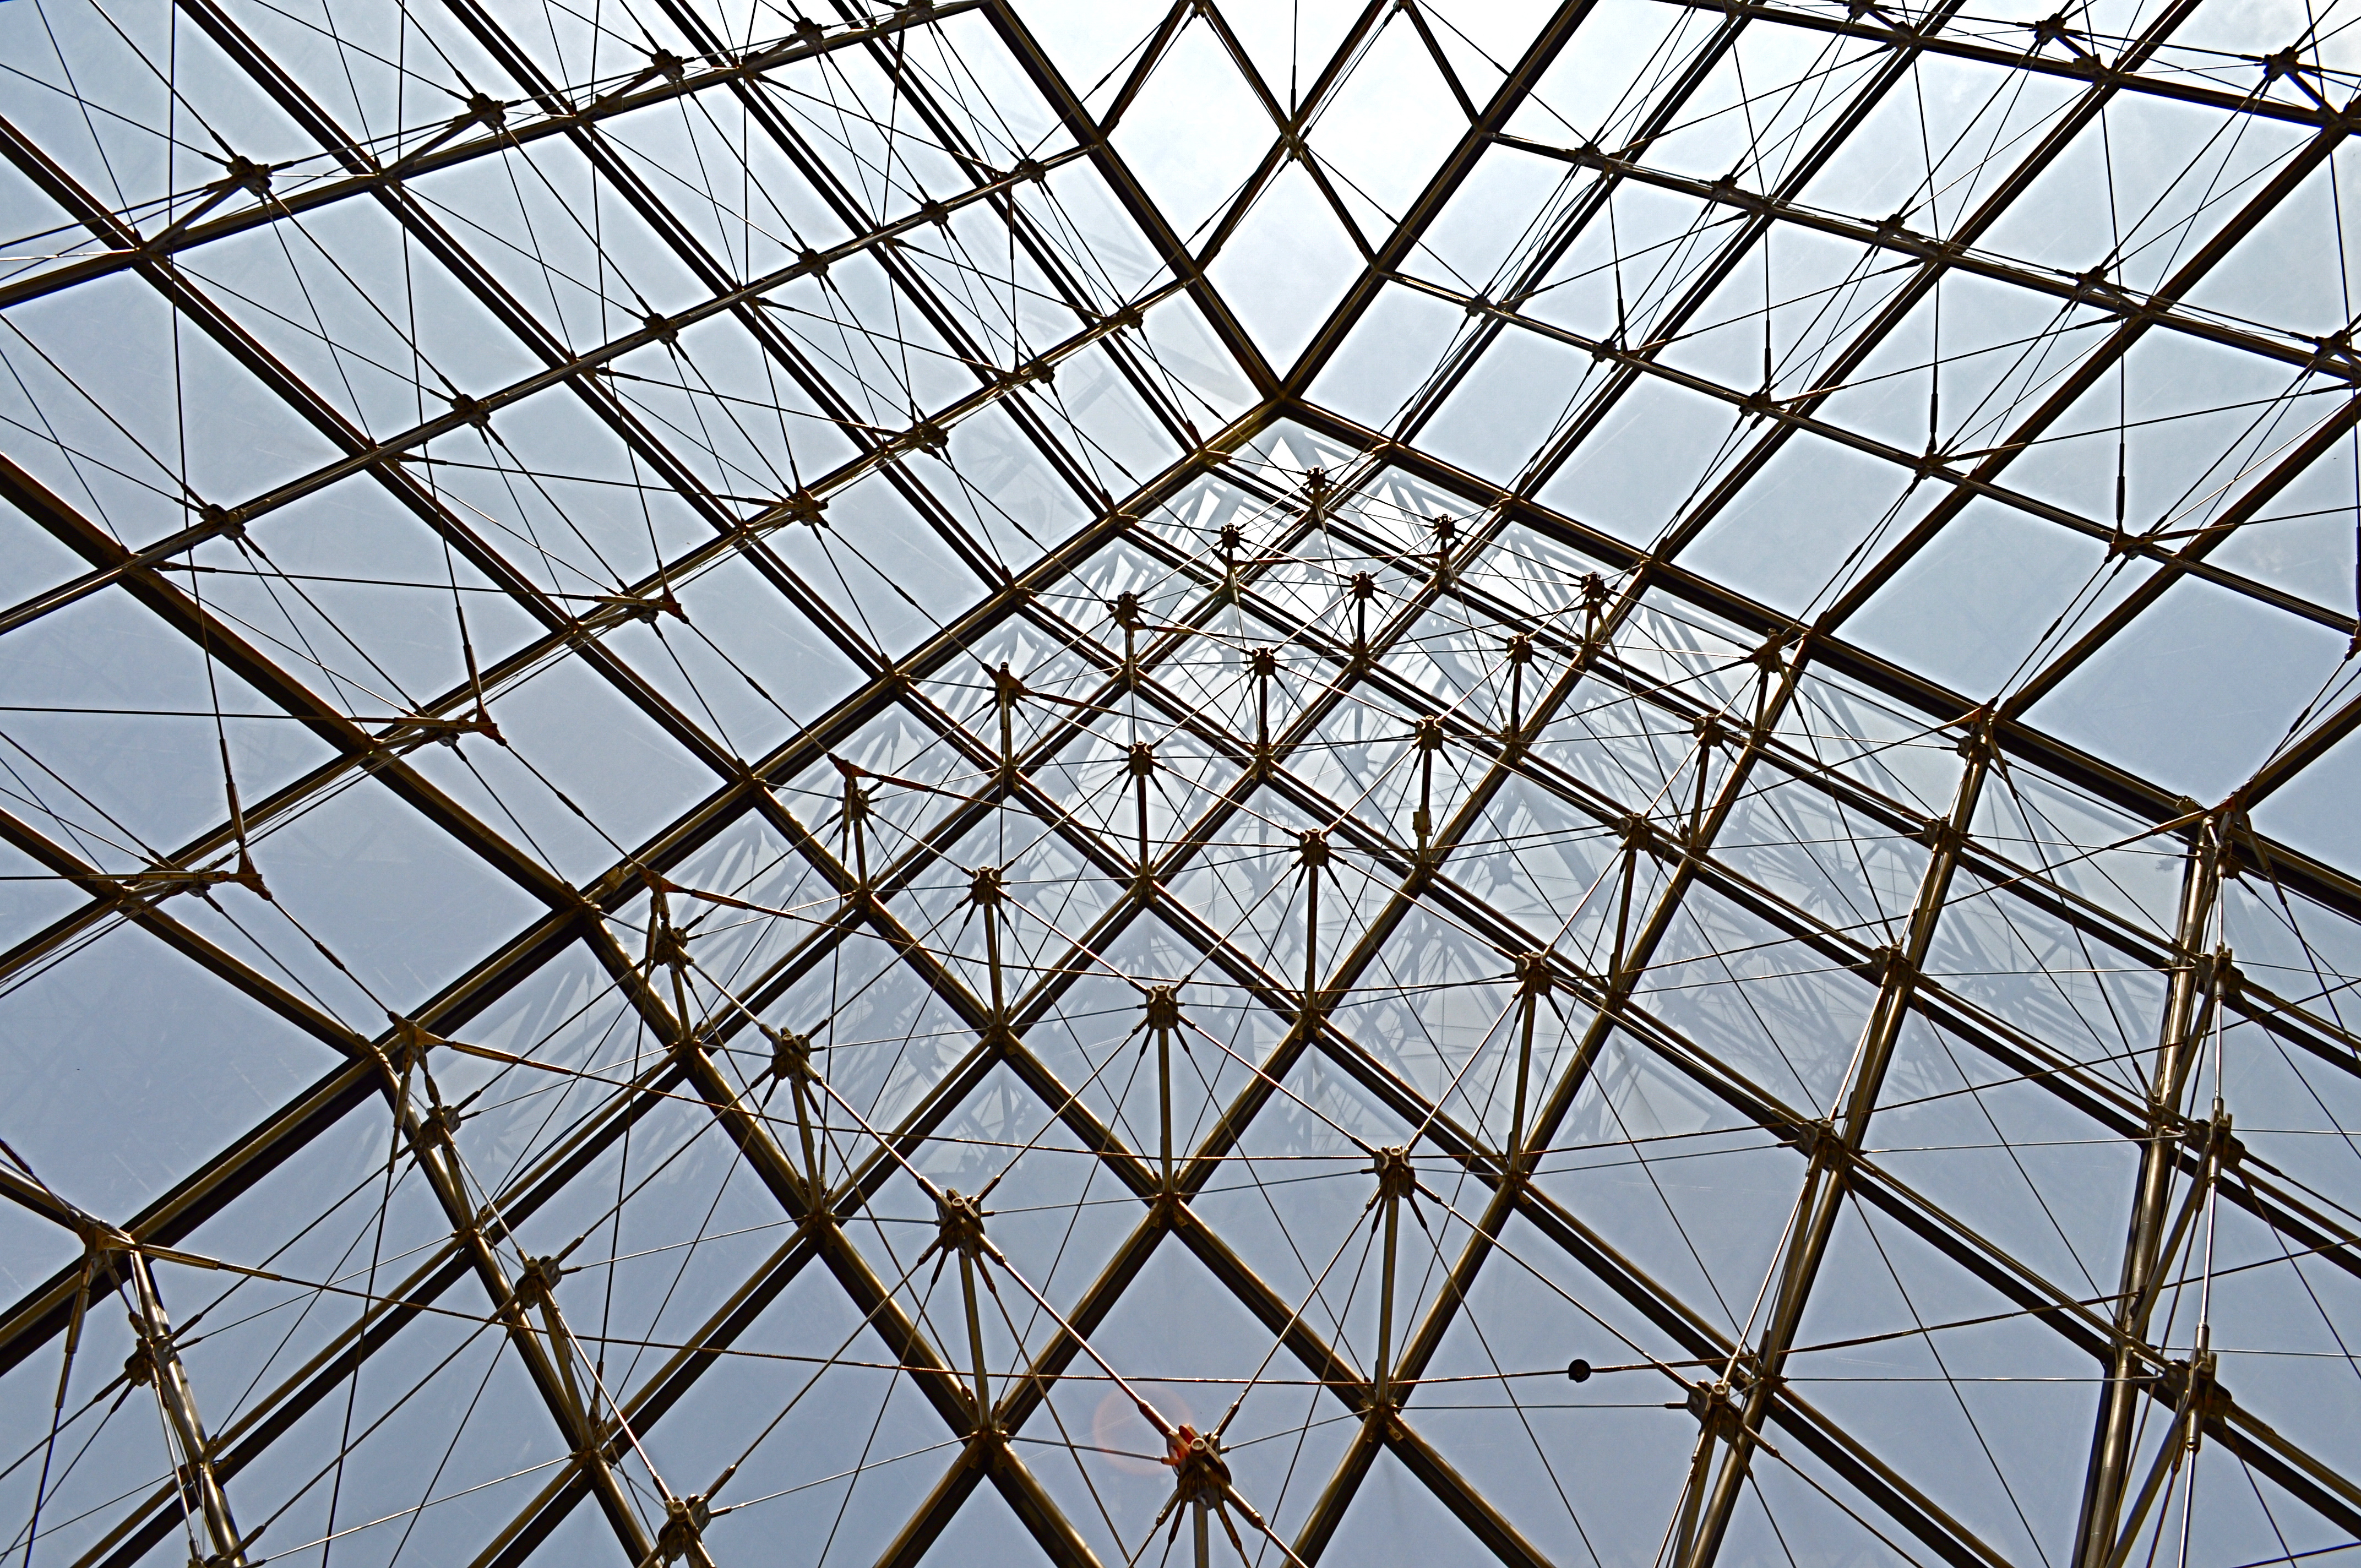 Lines in the Pyramid at the Louvre